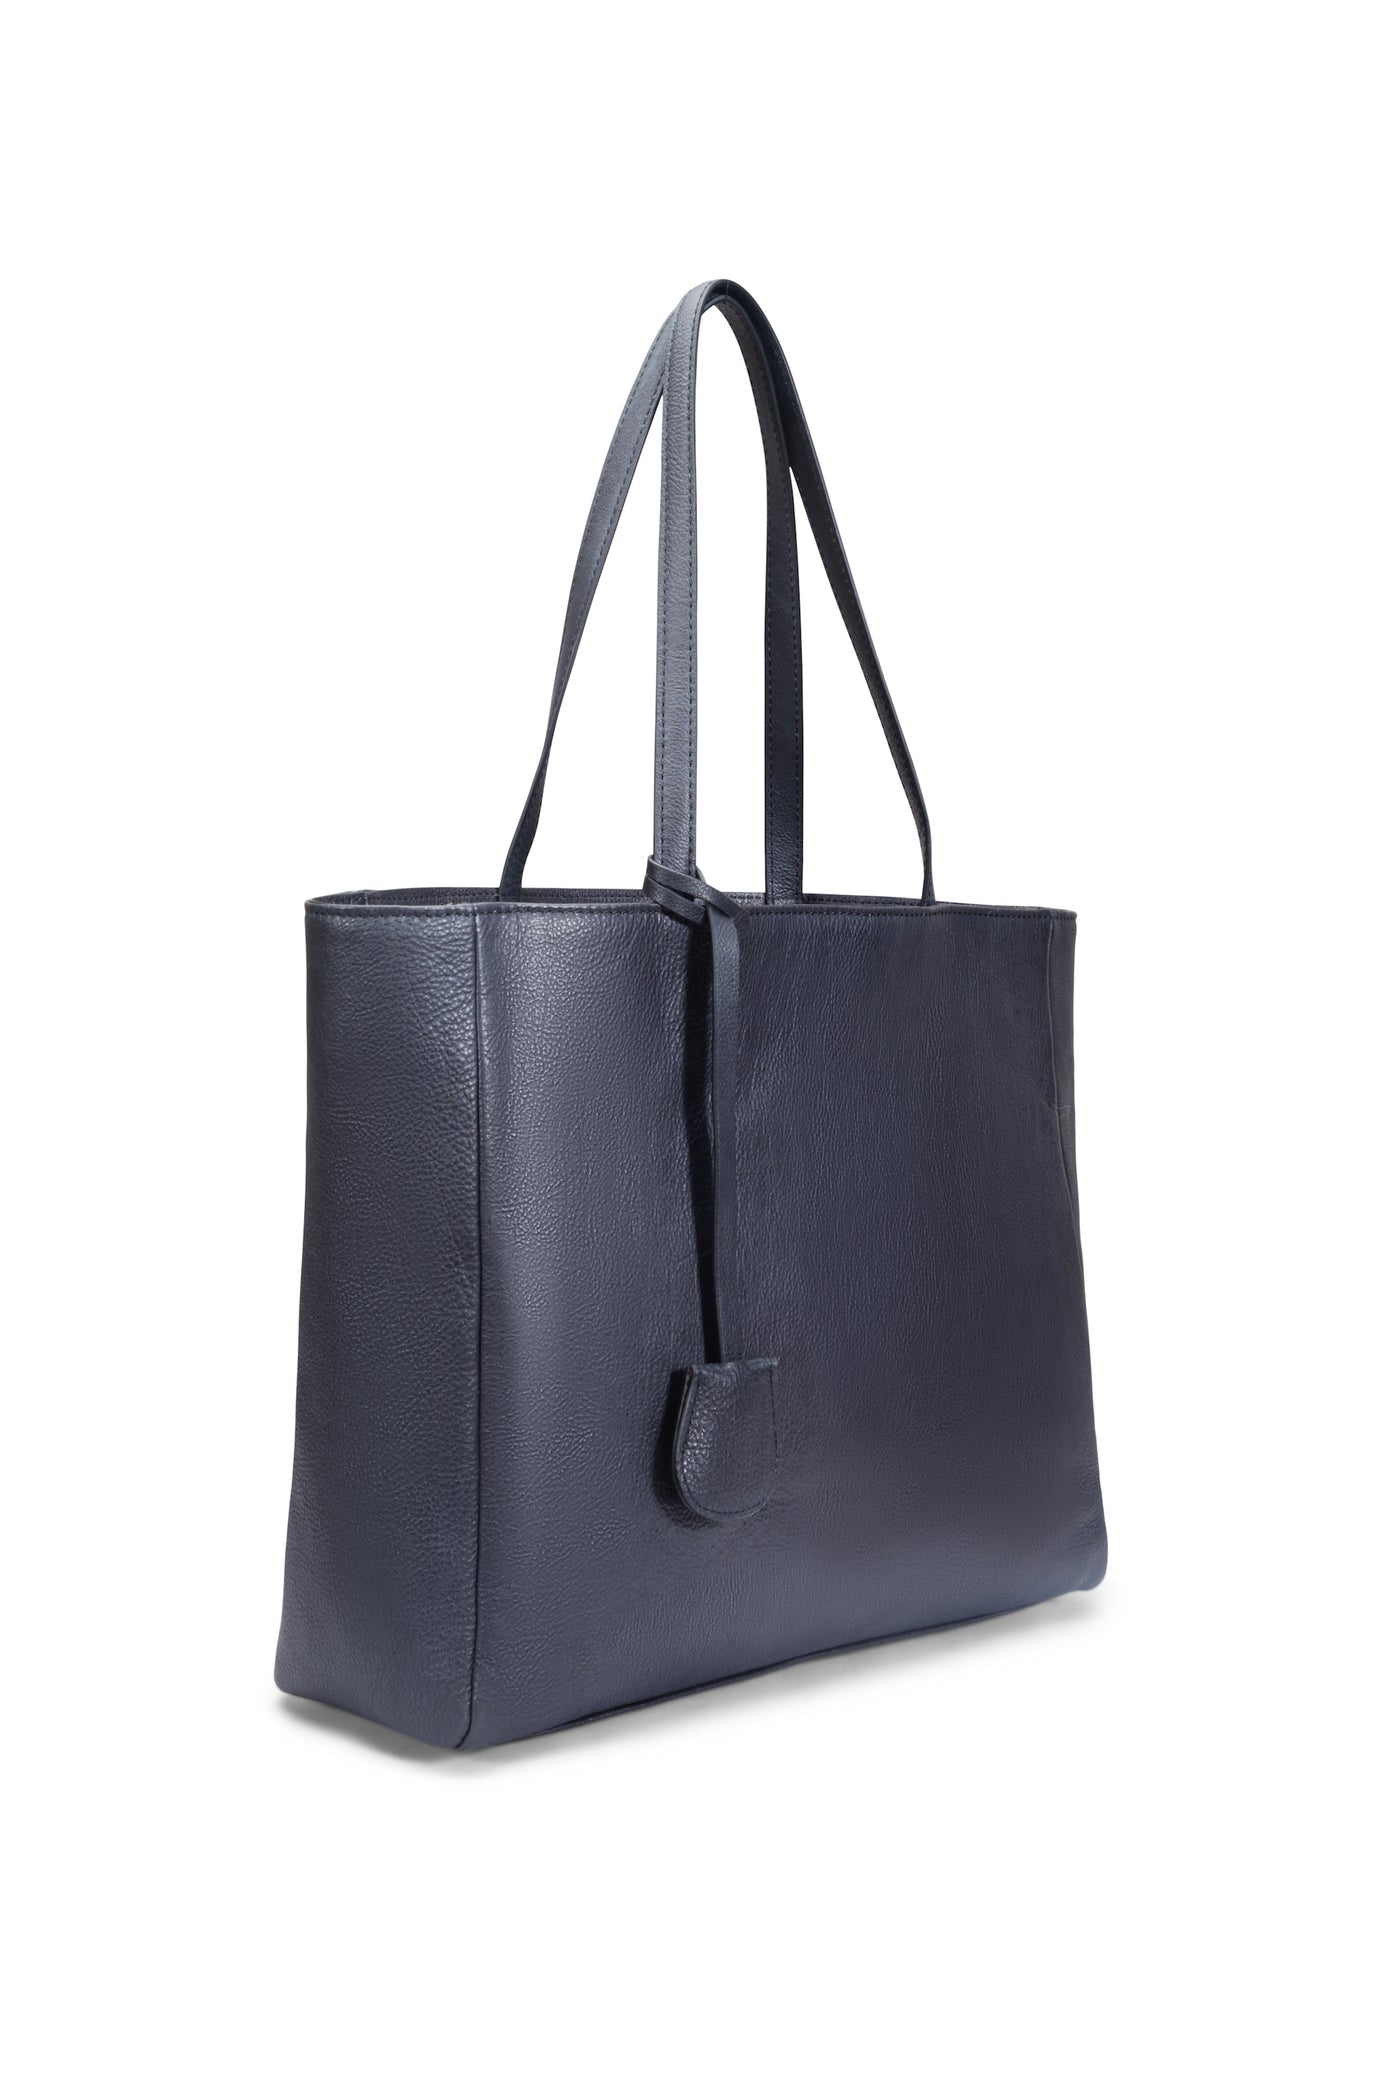 CLASSIC BLACK LEATHER TOTE BAG